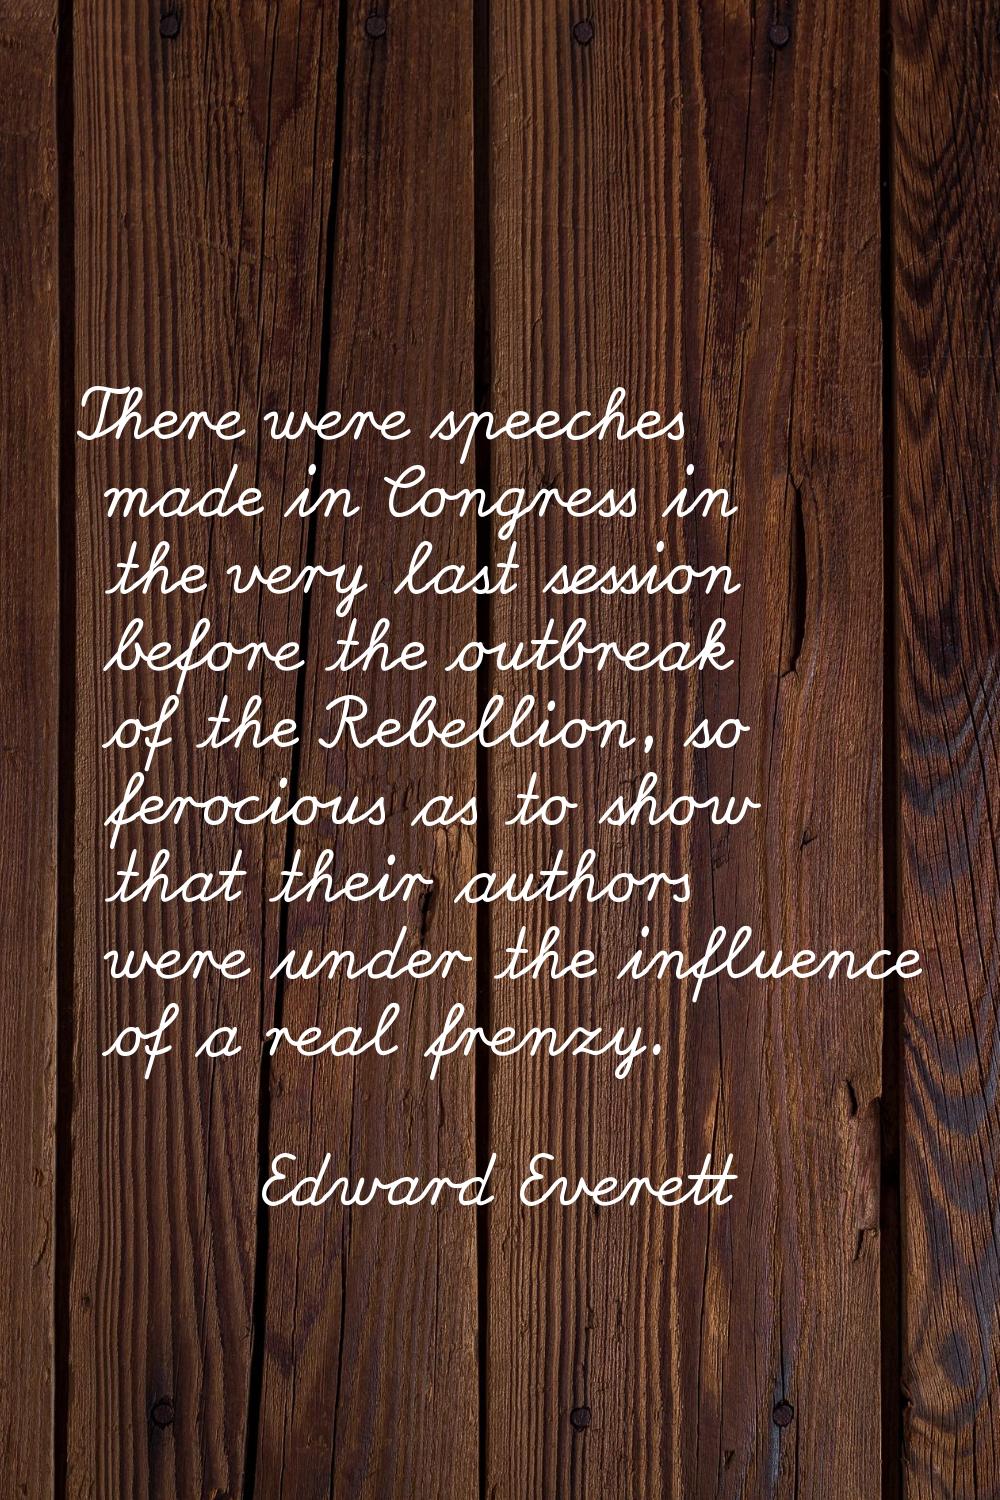 There were speeches made in Congress in the very last session before the outbreak of the Rebellion,